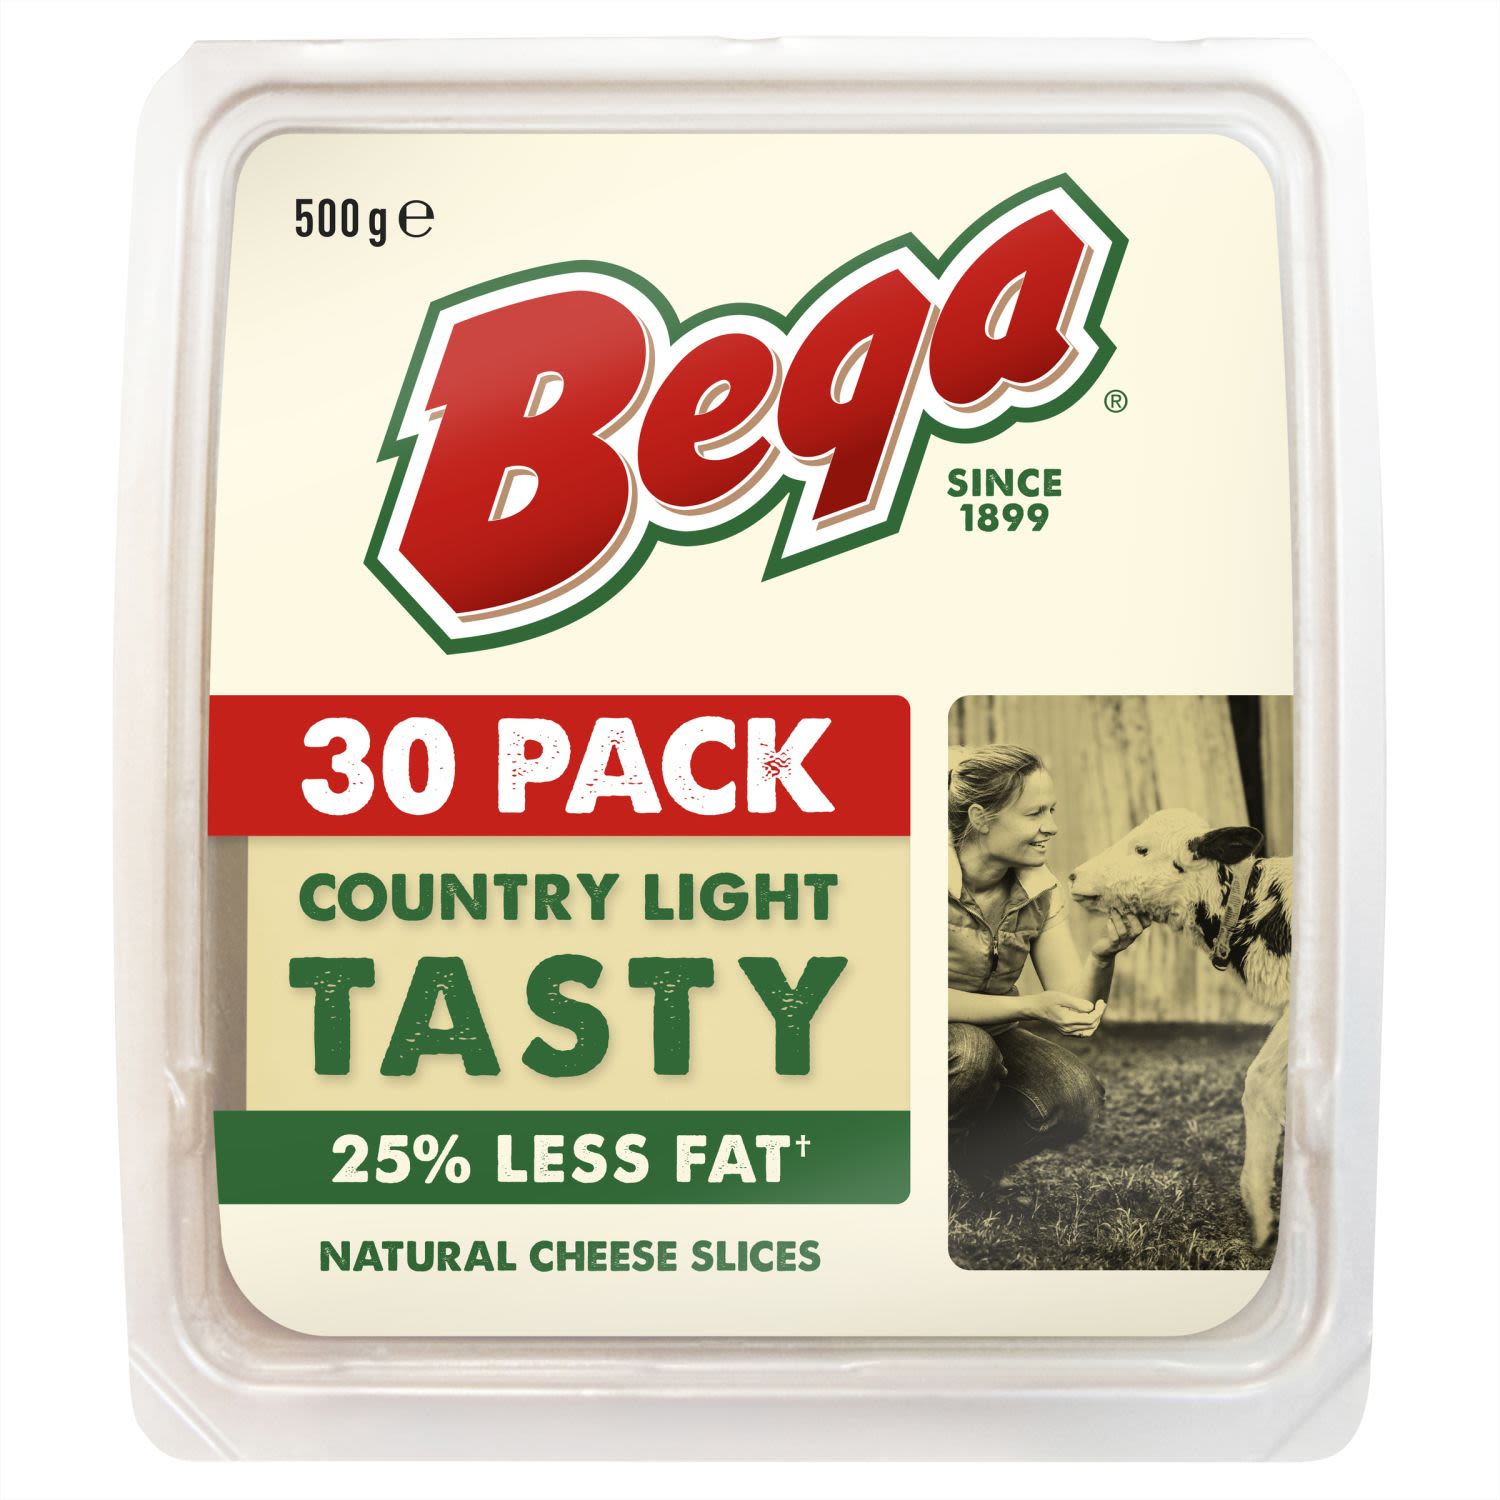 Bega Country Light Tasty 25% Less Fat Natural Cheese Slices, 30 Each